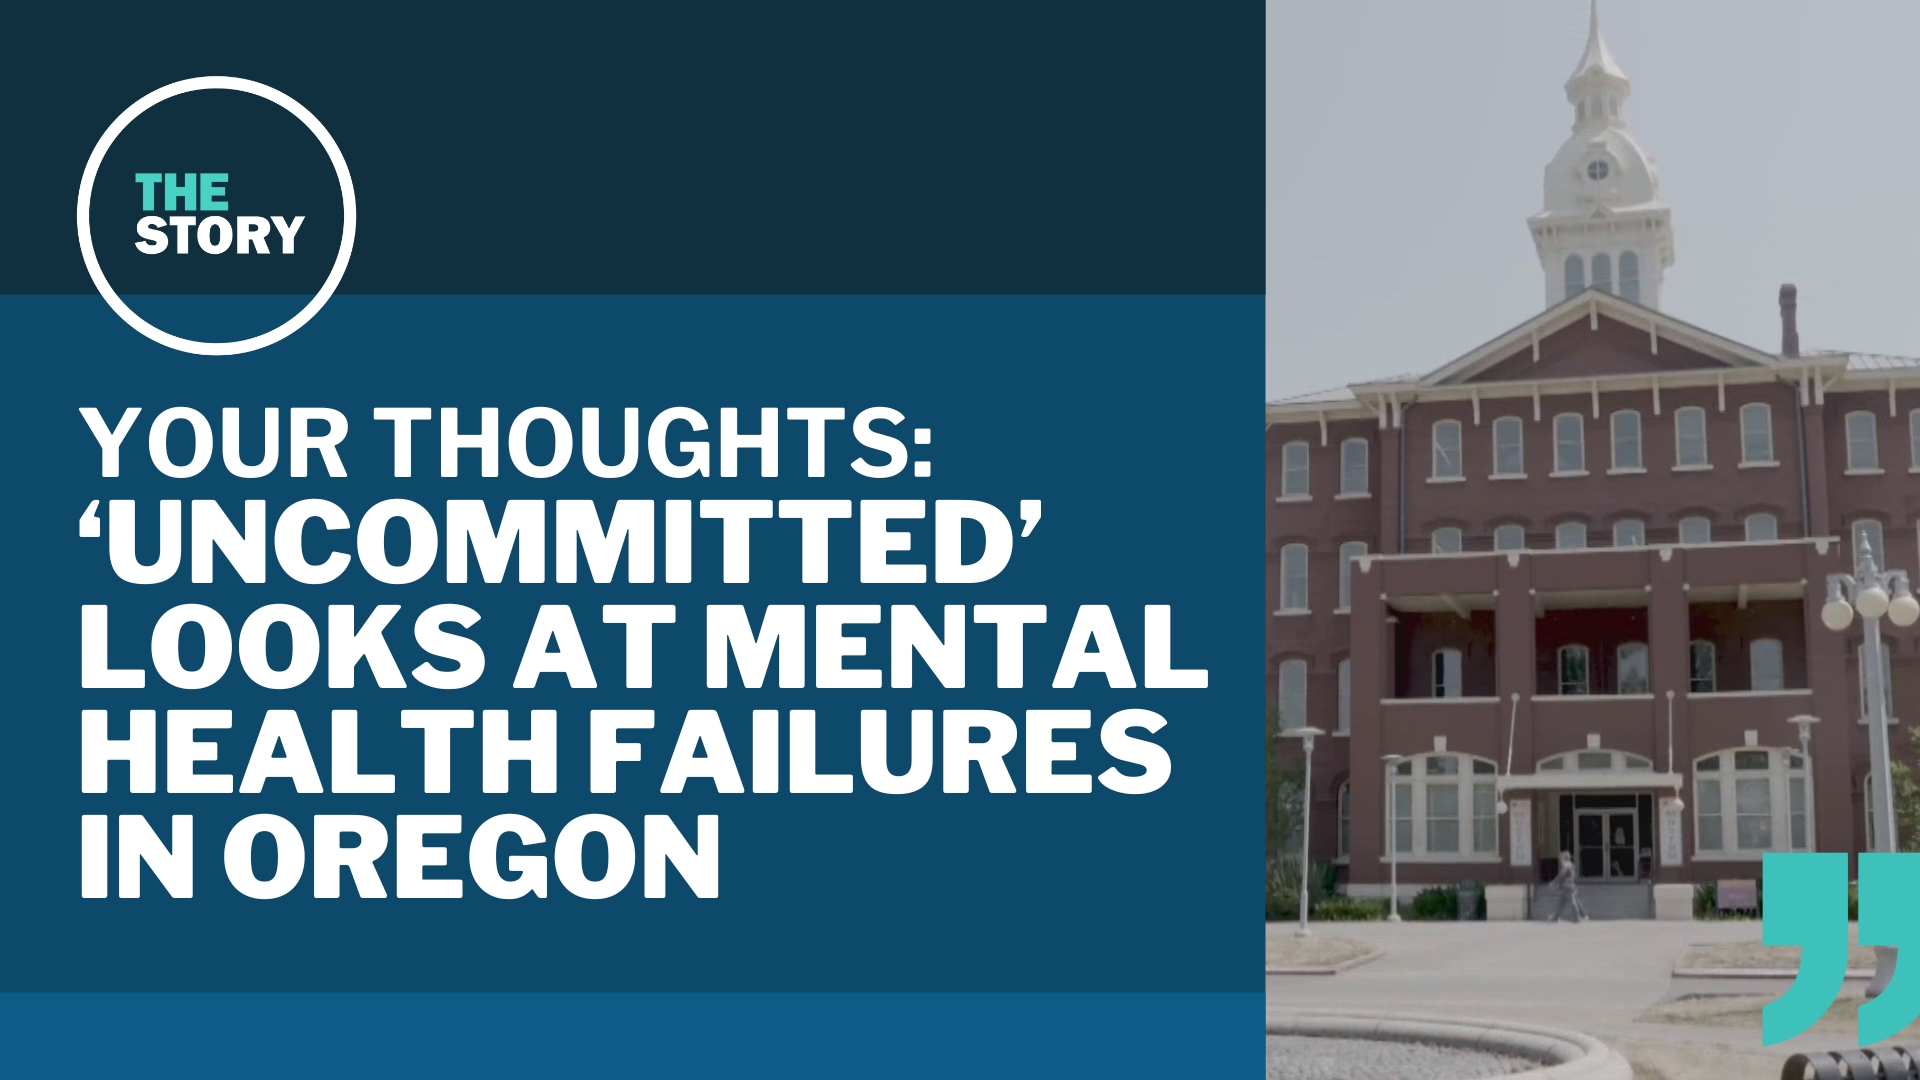 This week we brought you a new "Uncommitted" series on how Oregon has effectively criminalized involuntary psychiatric care. Here's what you had to say about it.